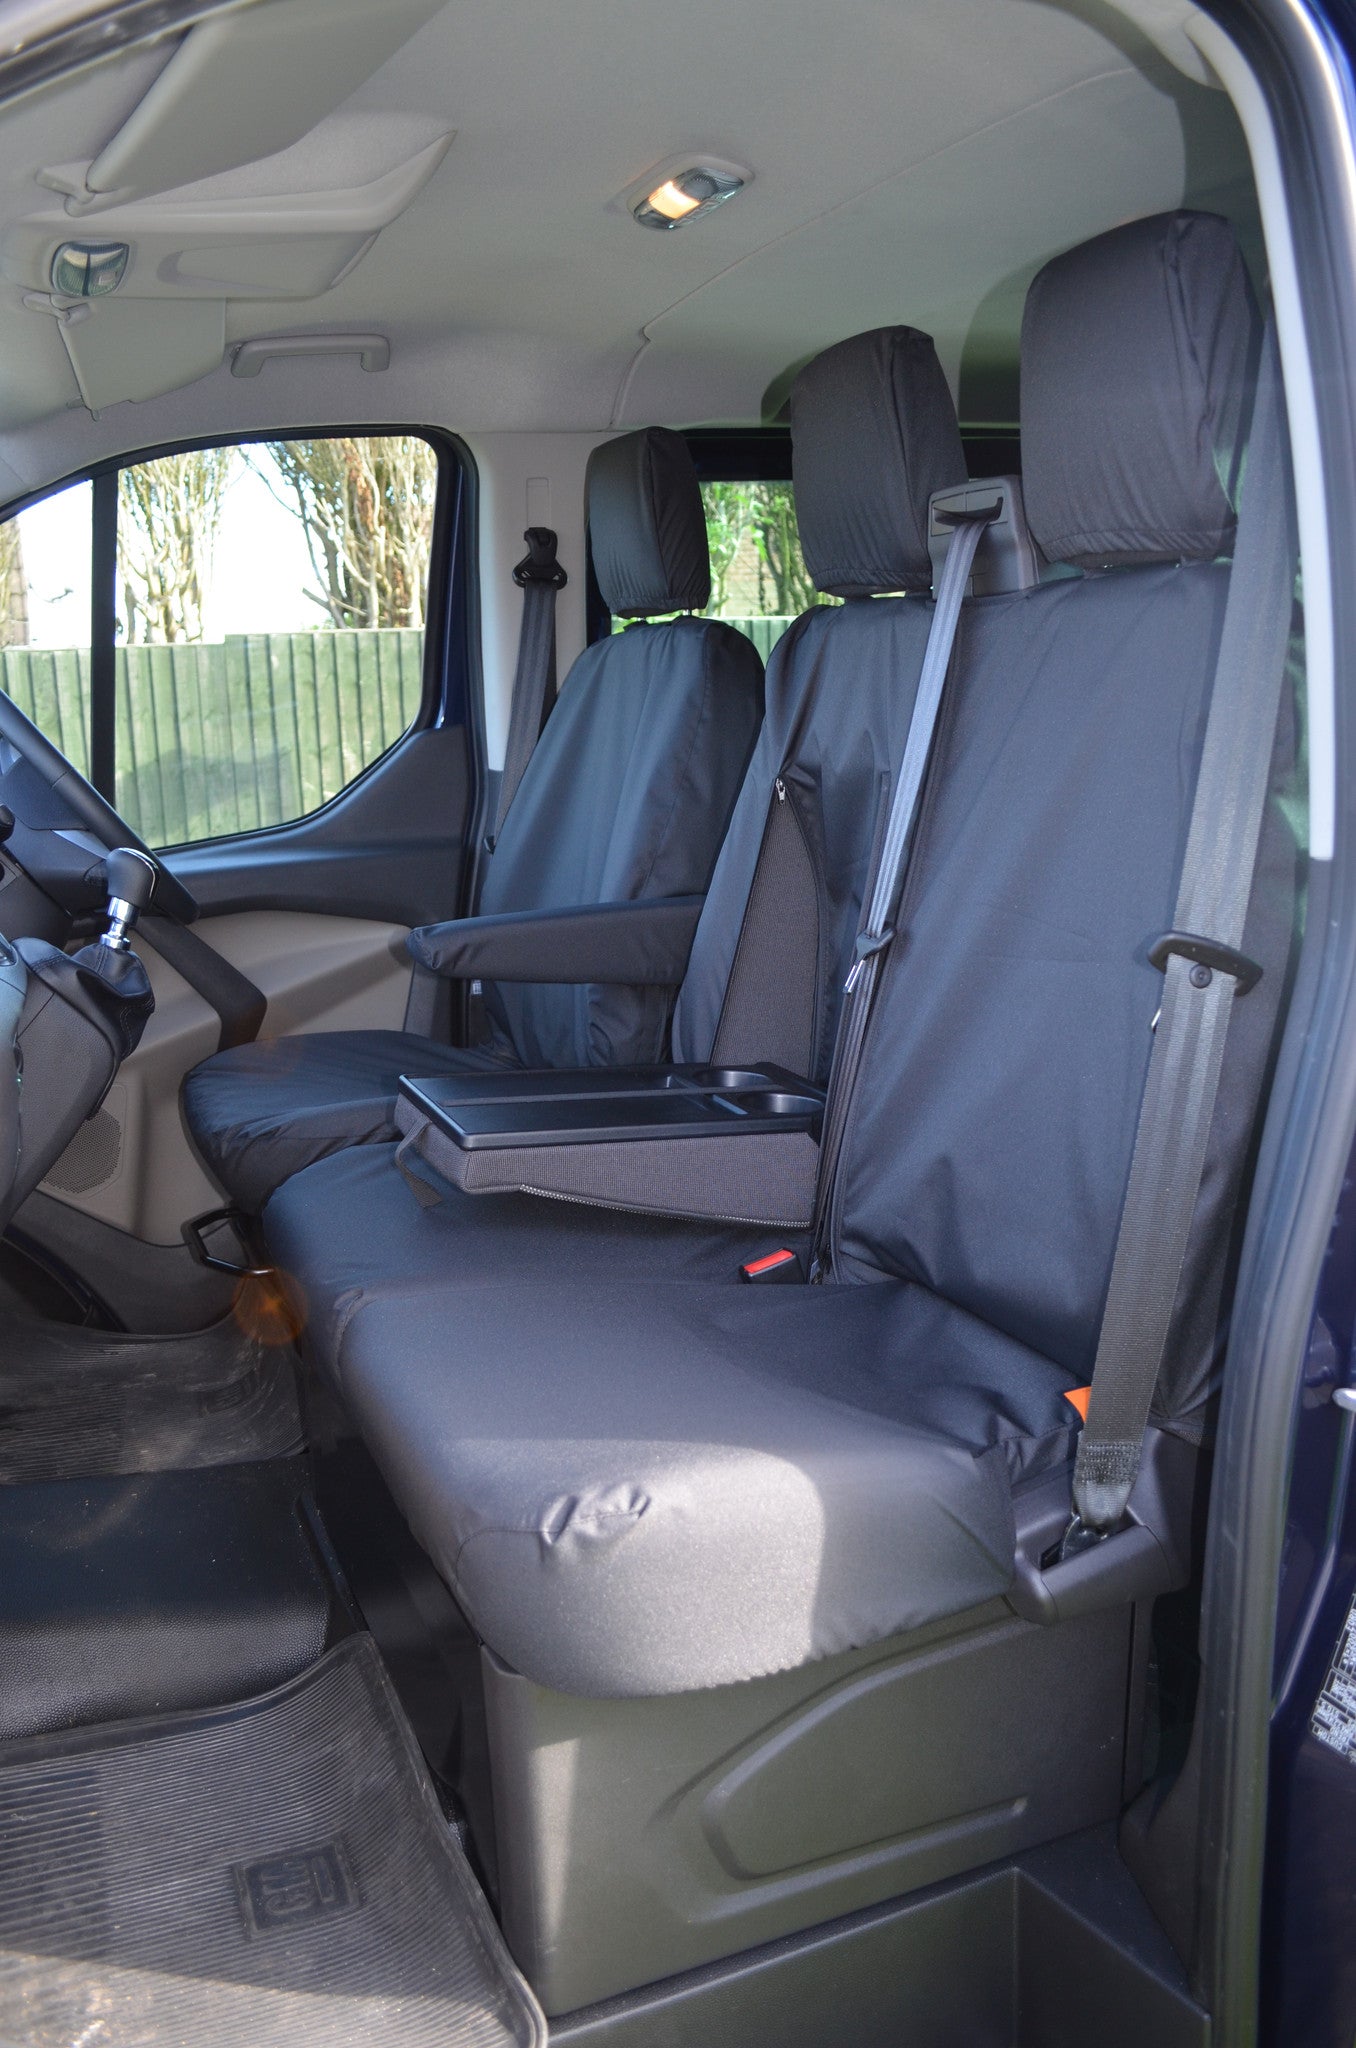 Ford Transit Van 2014+ Waterproof Tailored Front Seat Covers